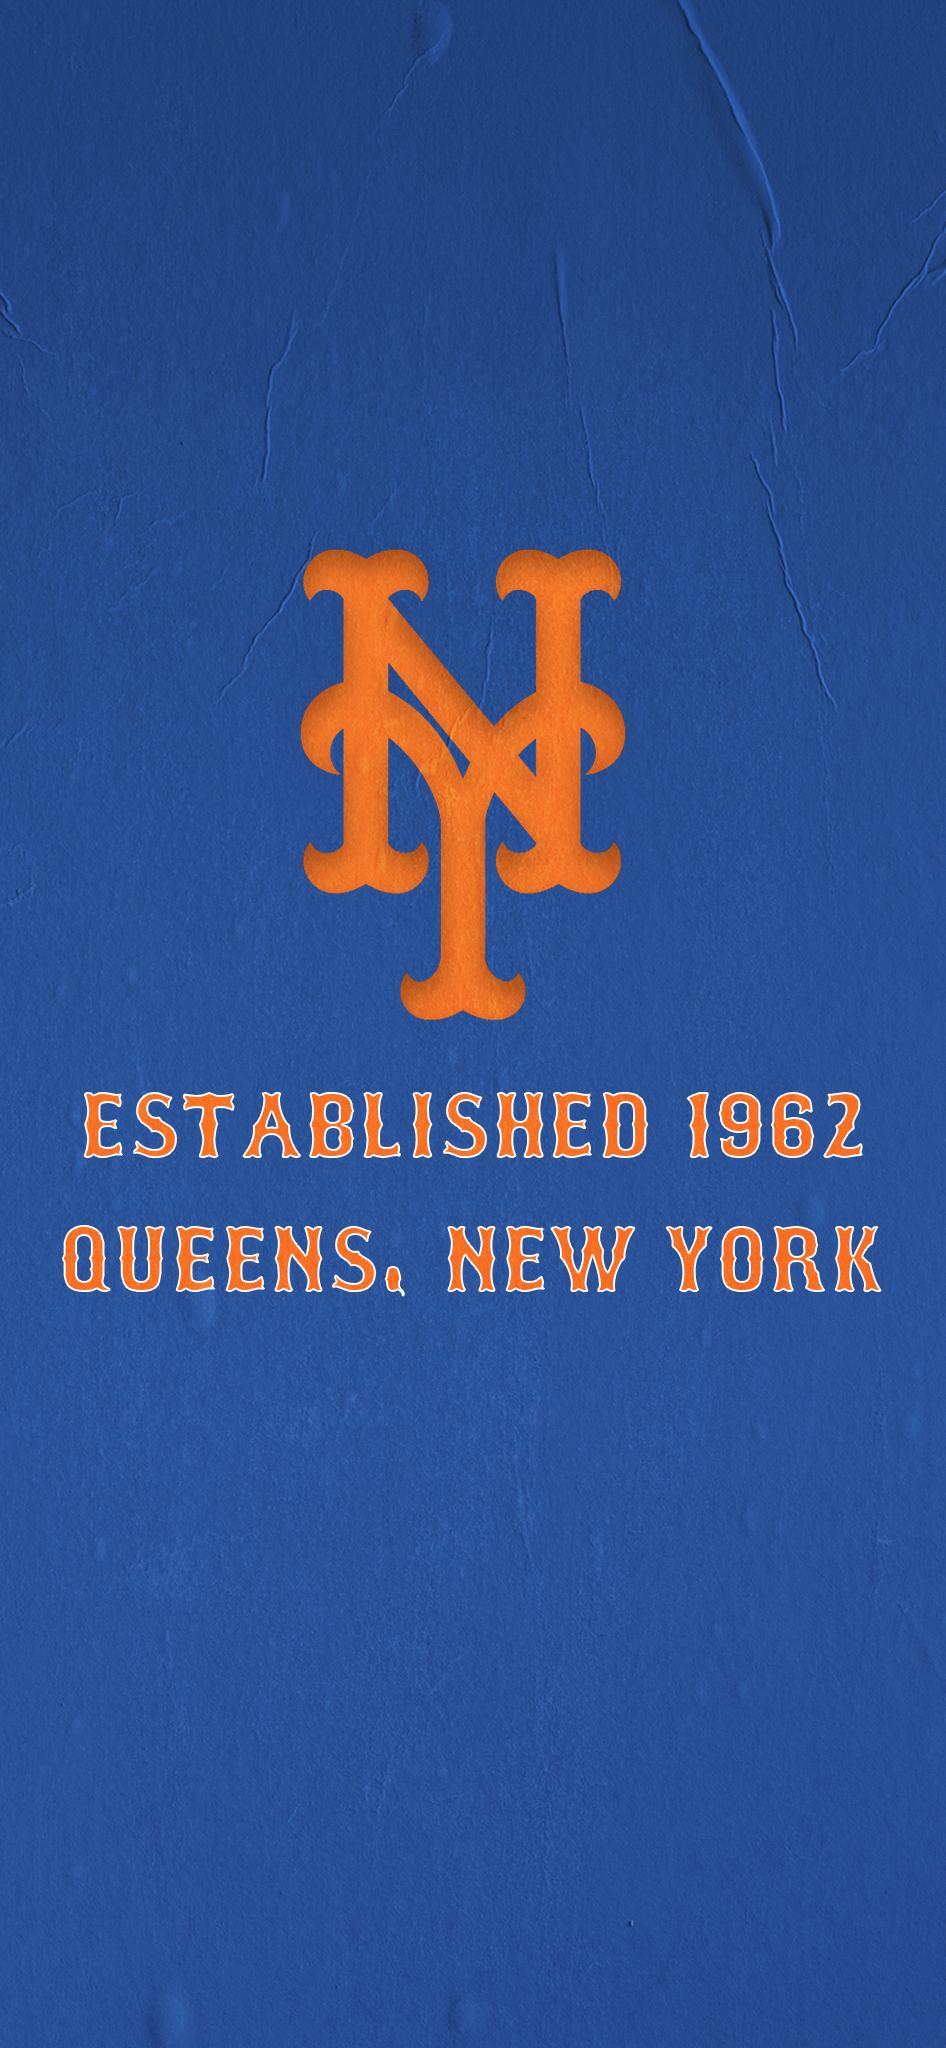 New York Mets on Twitter Update your wallpaper with some SpringTraining  smiles  WallpaperWednesday httpstcoGvoEzsxoDa  Twitter